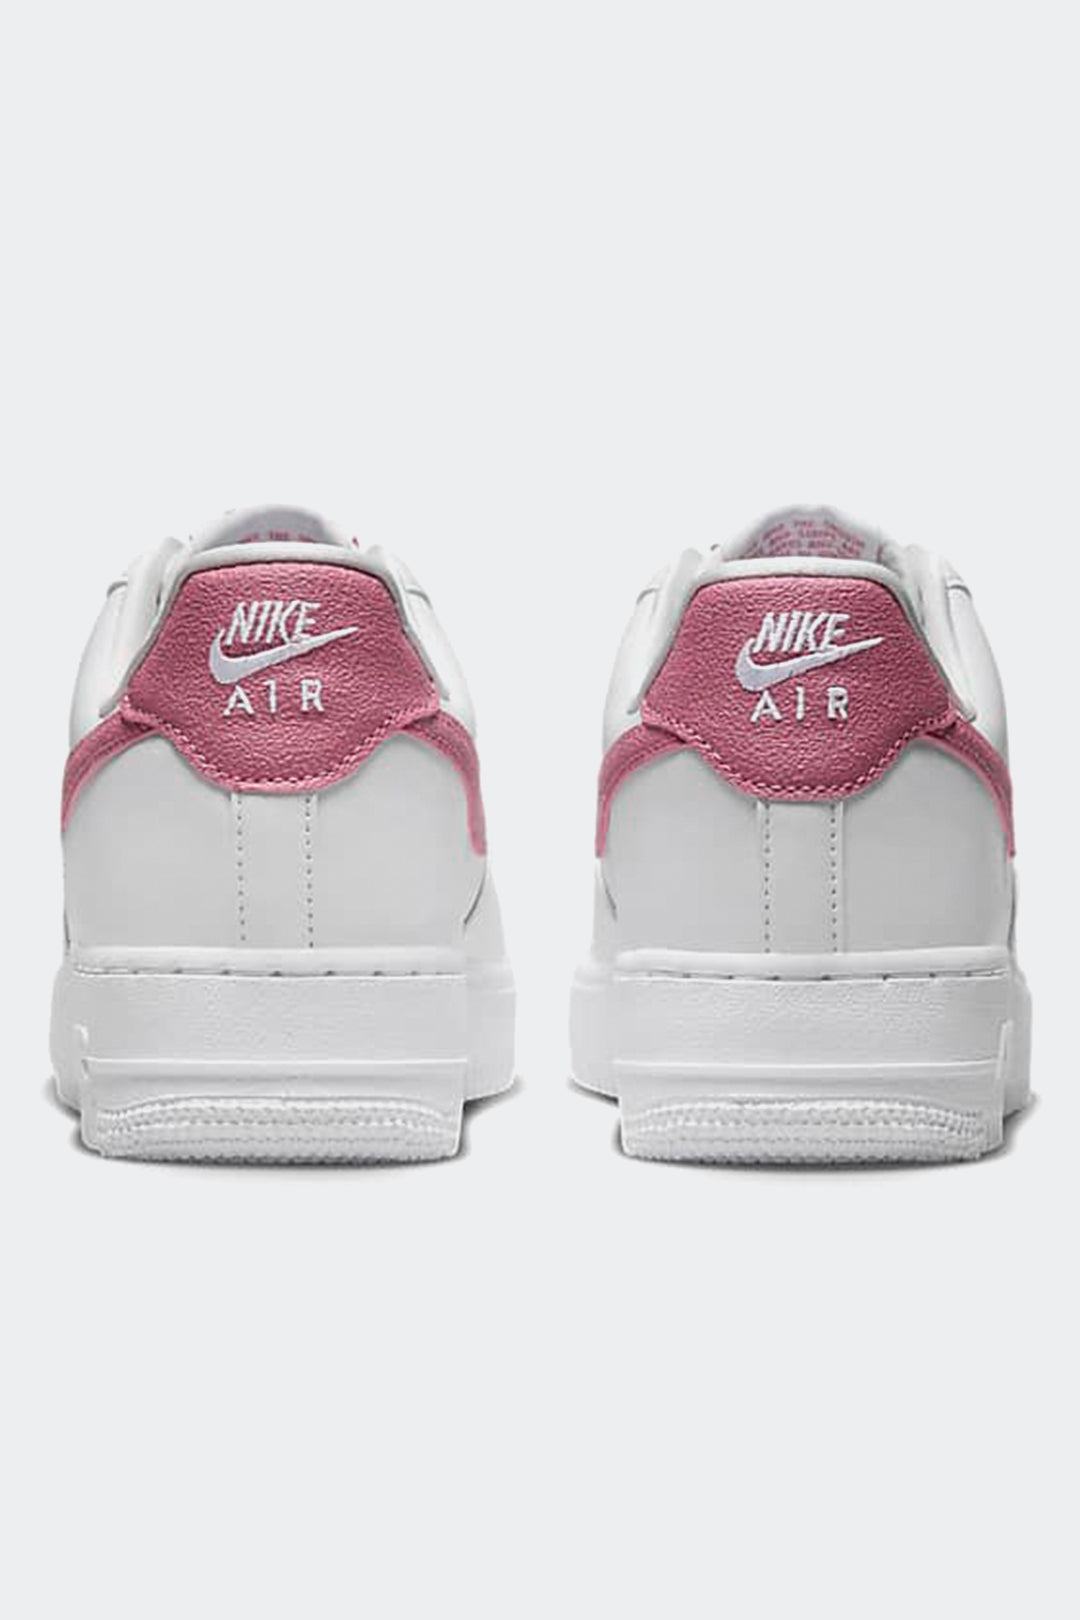 NIKE AIR FORCE 1 LOW '07 ESS "DESERT BERRY"- MUJER - HYPE